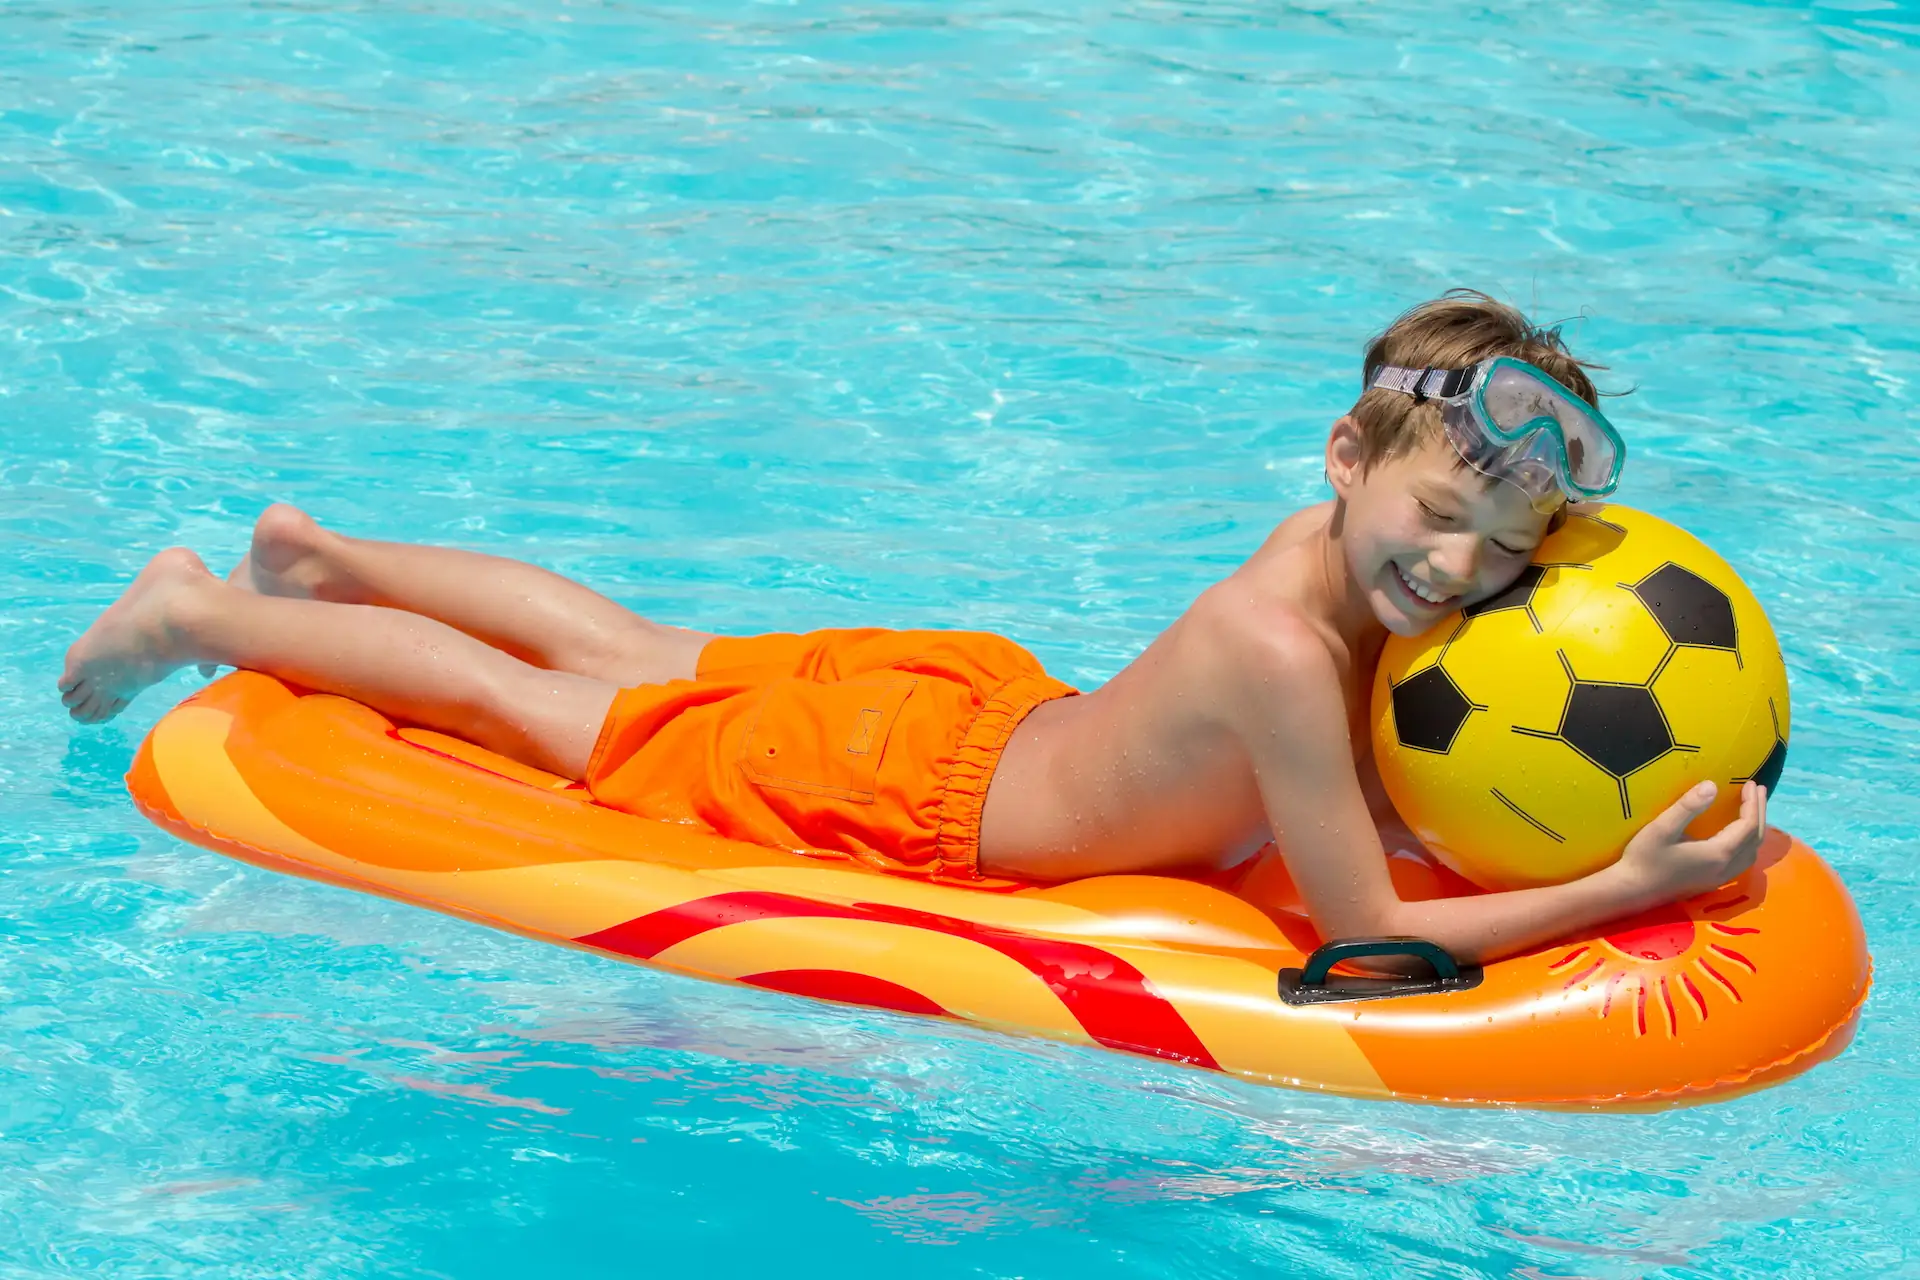 Medium shot of a young swimmer in orange swim trunks laying face down on an orange pool float while embracing a beach ball that looks like a yellow soccer ball. It's important the pool products like floats and toys be high-quality for the sake of user safety and enjoyment.